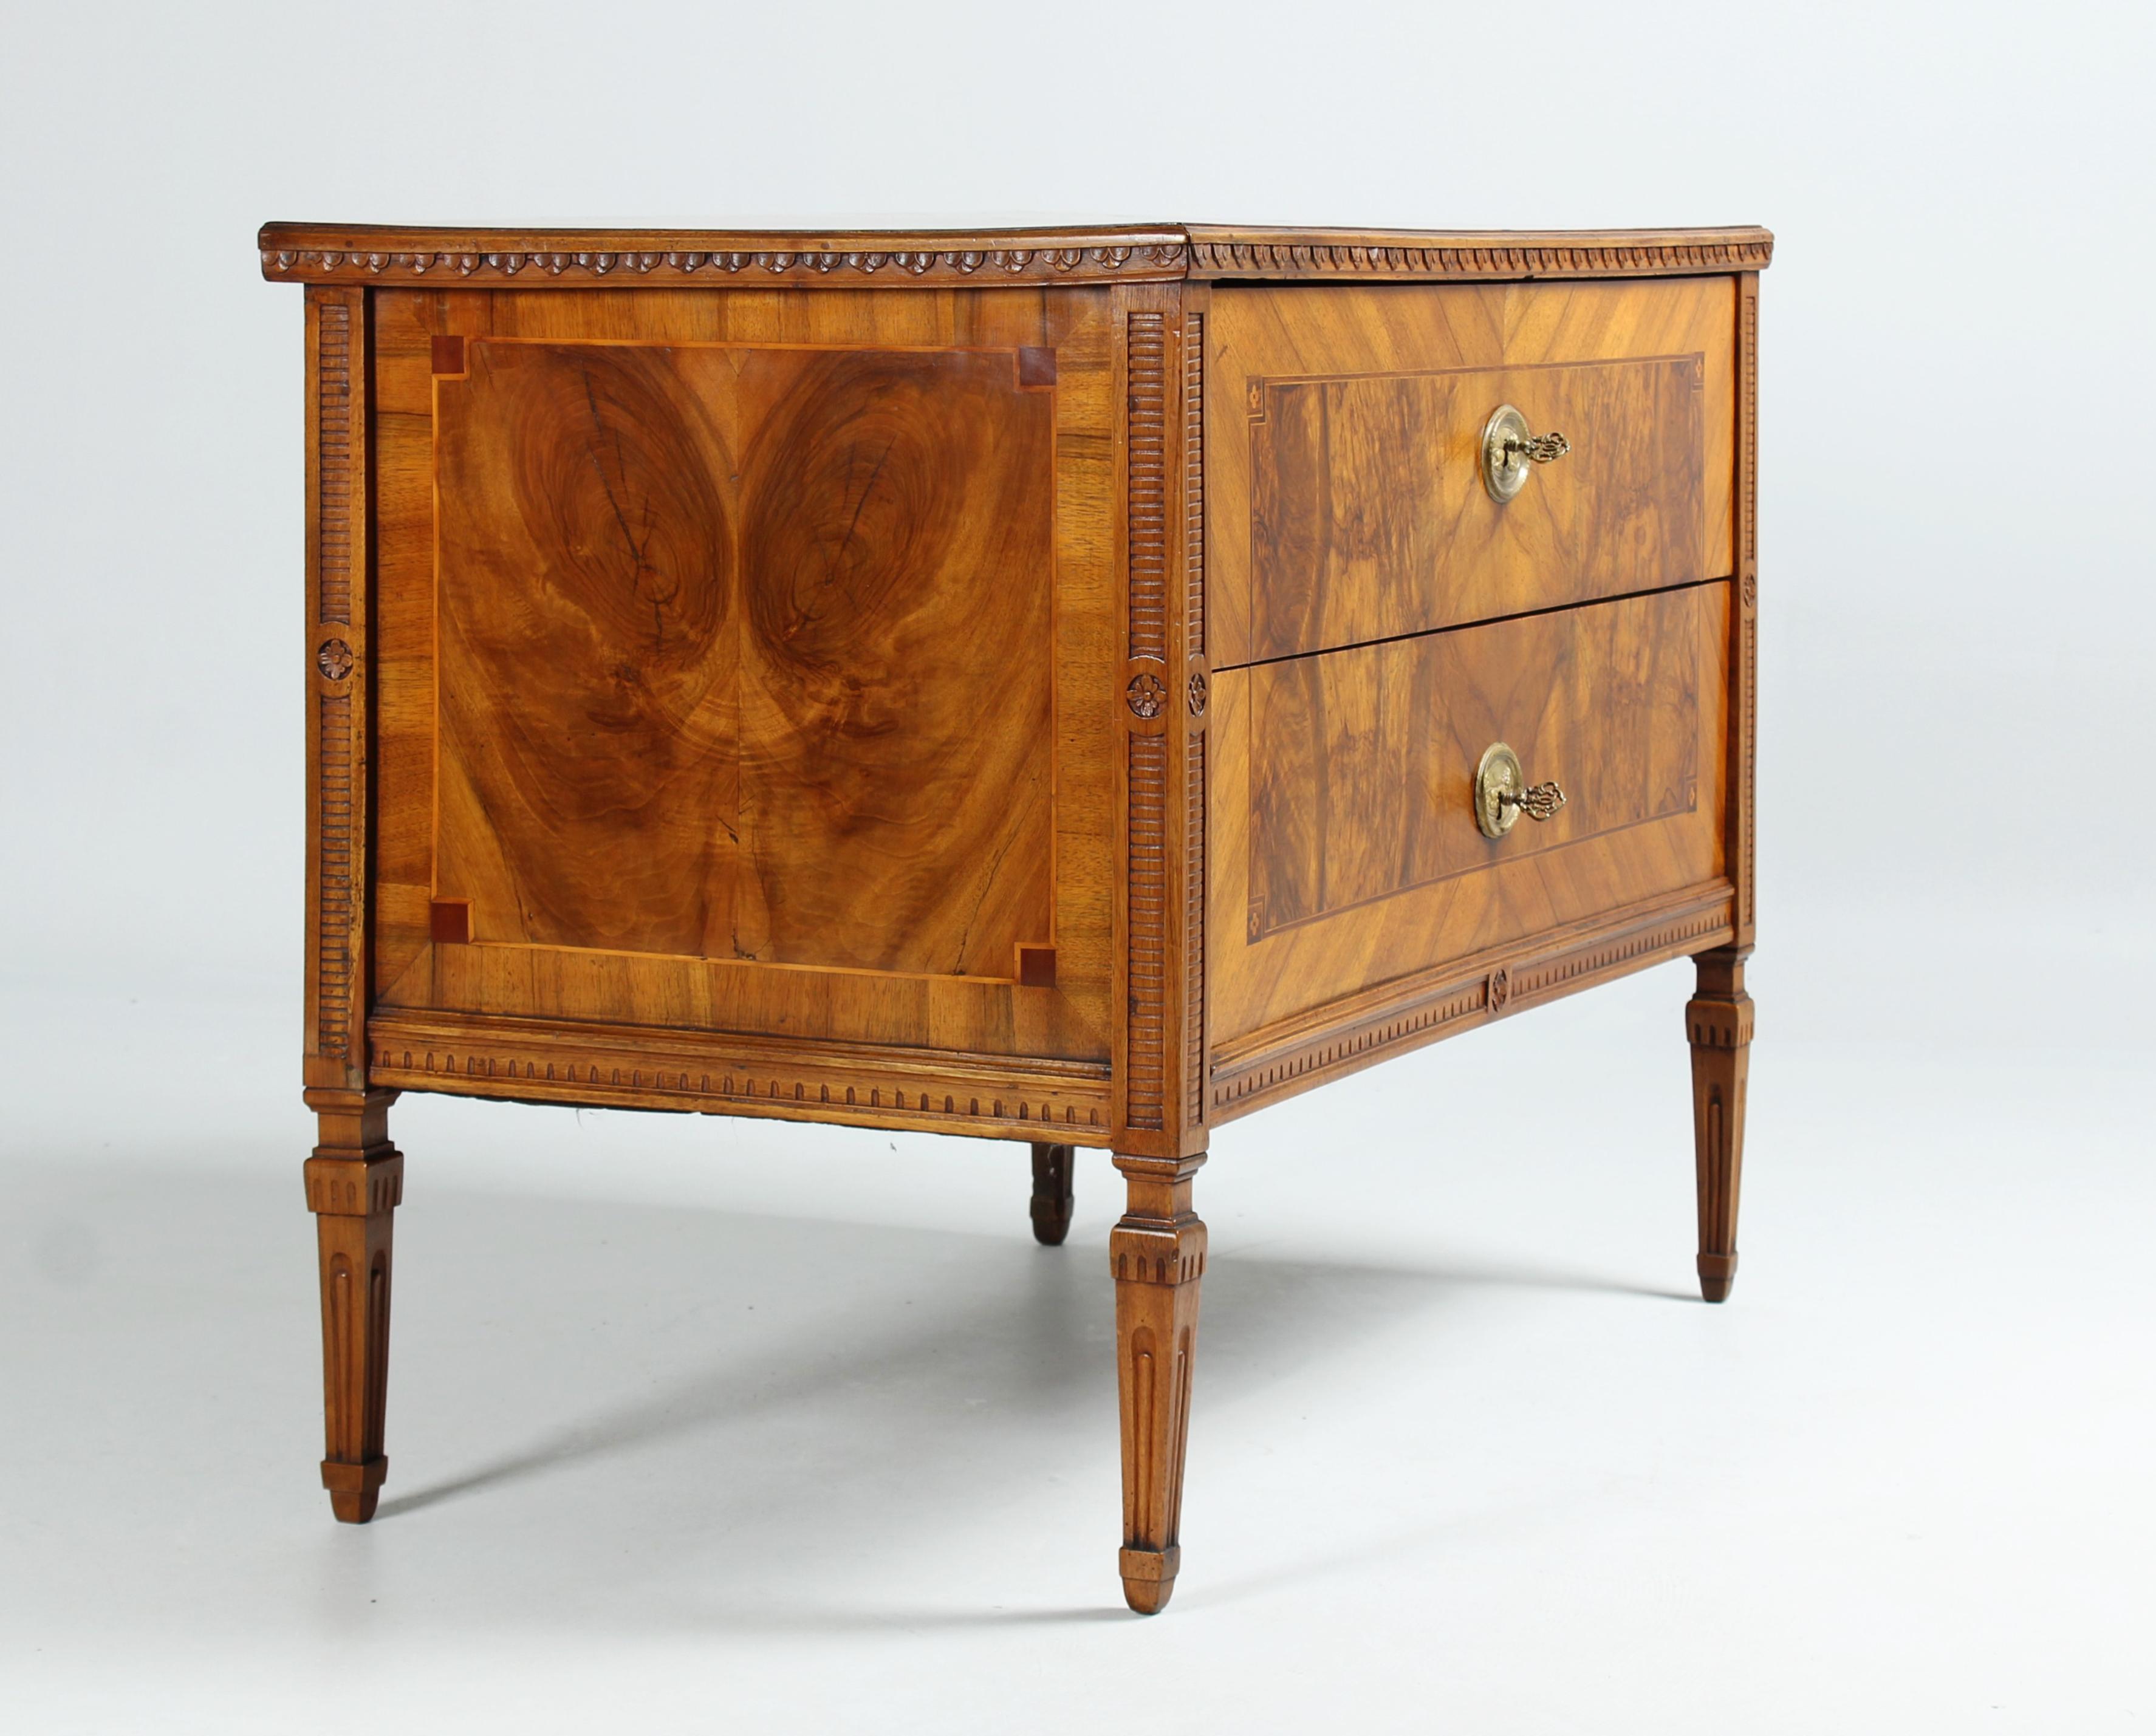 Antique classicist chest of drawers

Germany
Walnut
around 1780

Dimensions: H x W x D: 81 x 111 x 61 cm

Description:
Two-tier chest of drawers with fine carved decoration, created in German classicism, the so-called 